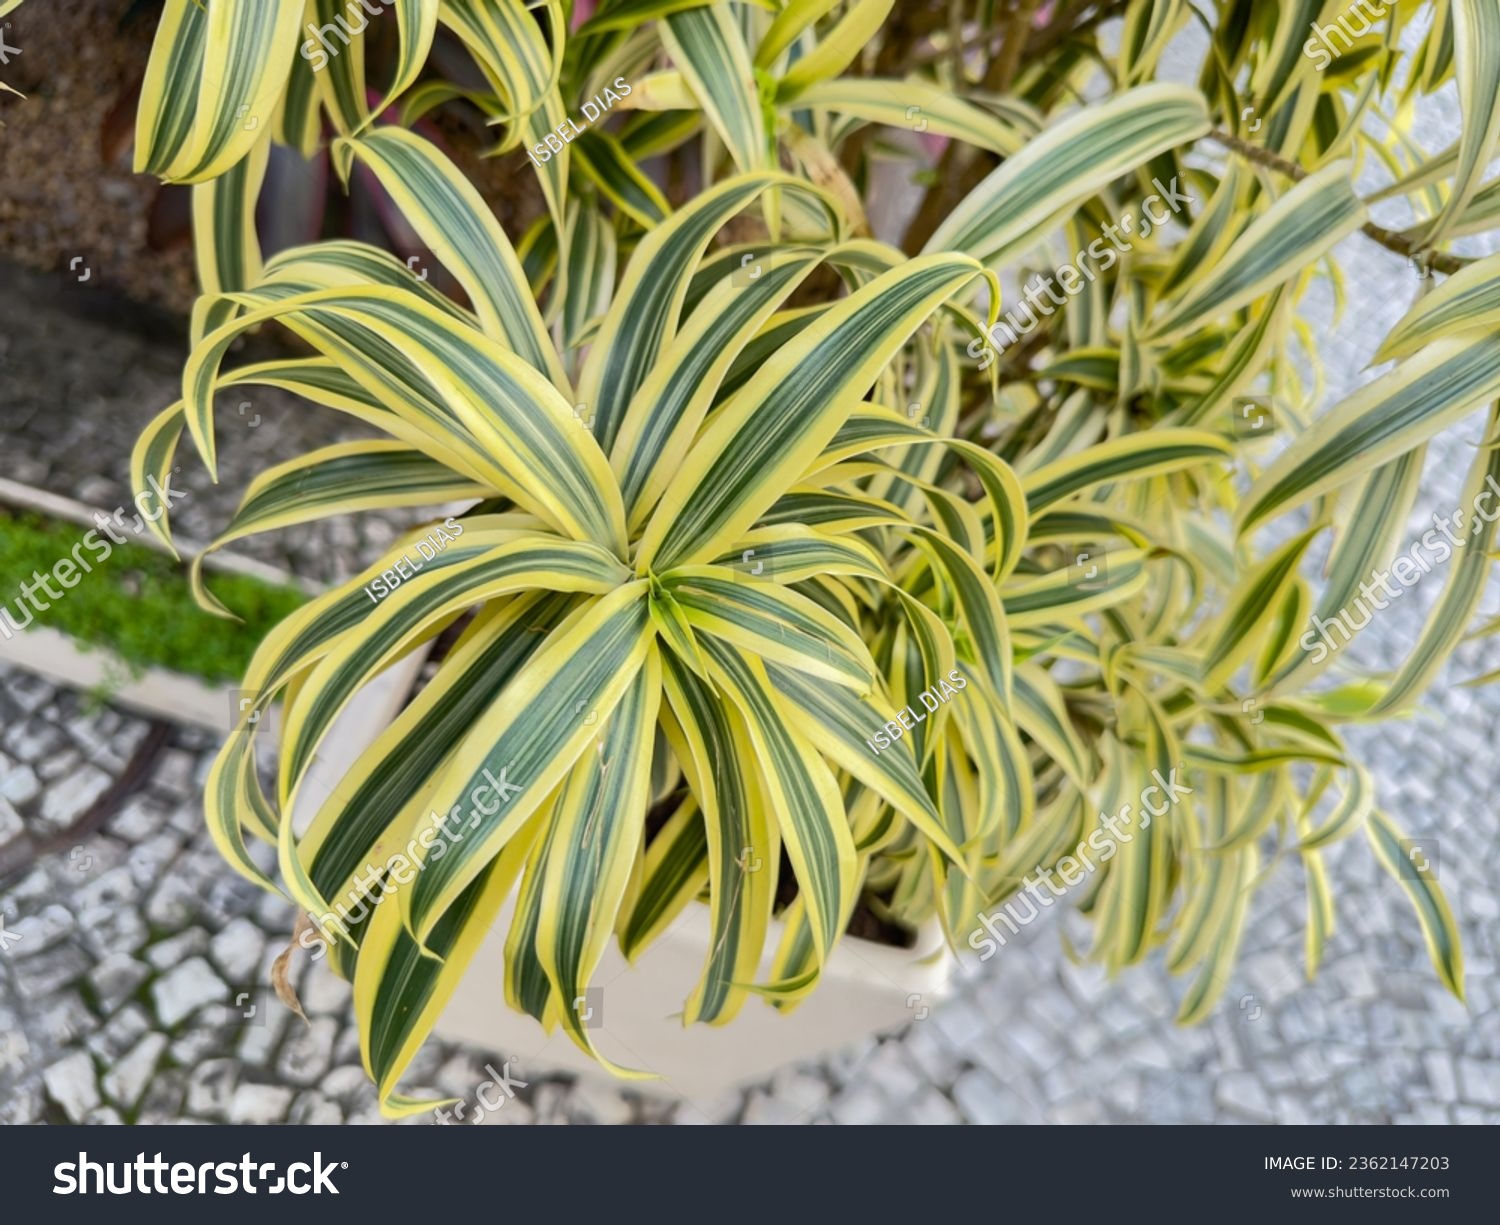 Leaves of Dracaena reflexa commonly called Indian song or pleomele. Planted in a large pot, it decorates the sidewalk. #2362147203